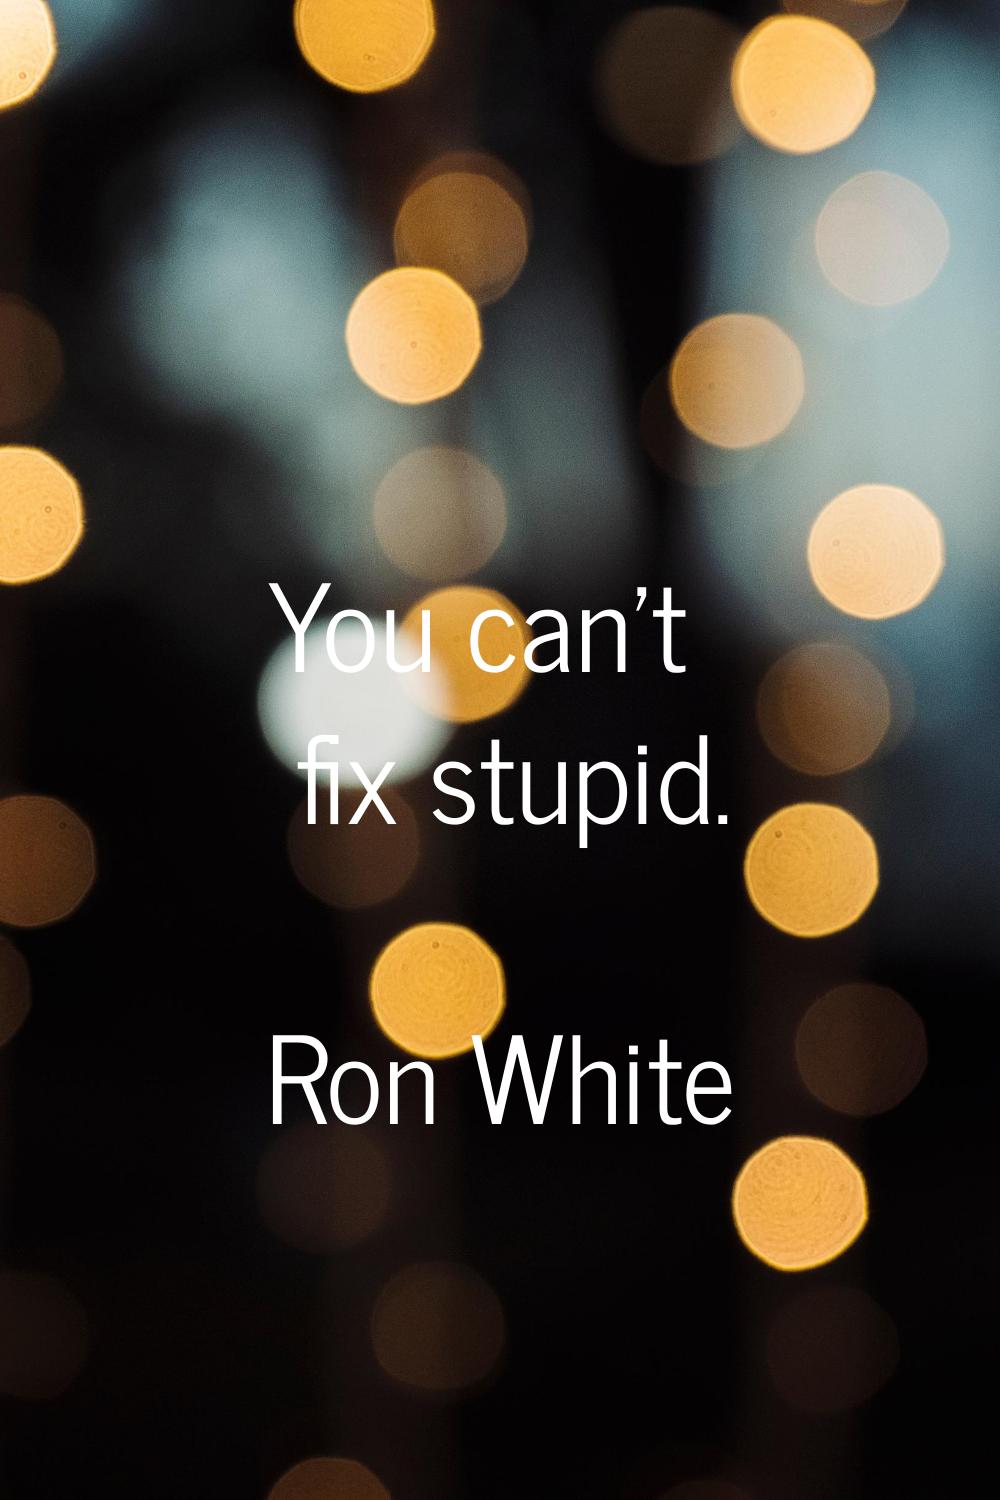 You can't fix stupid.